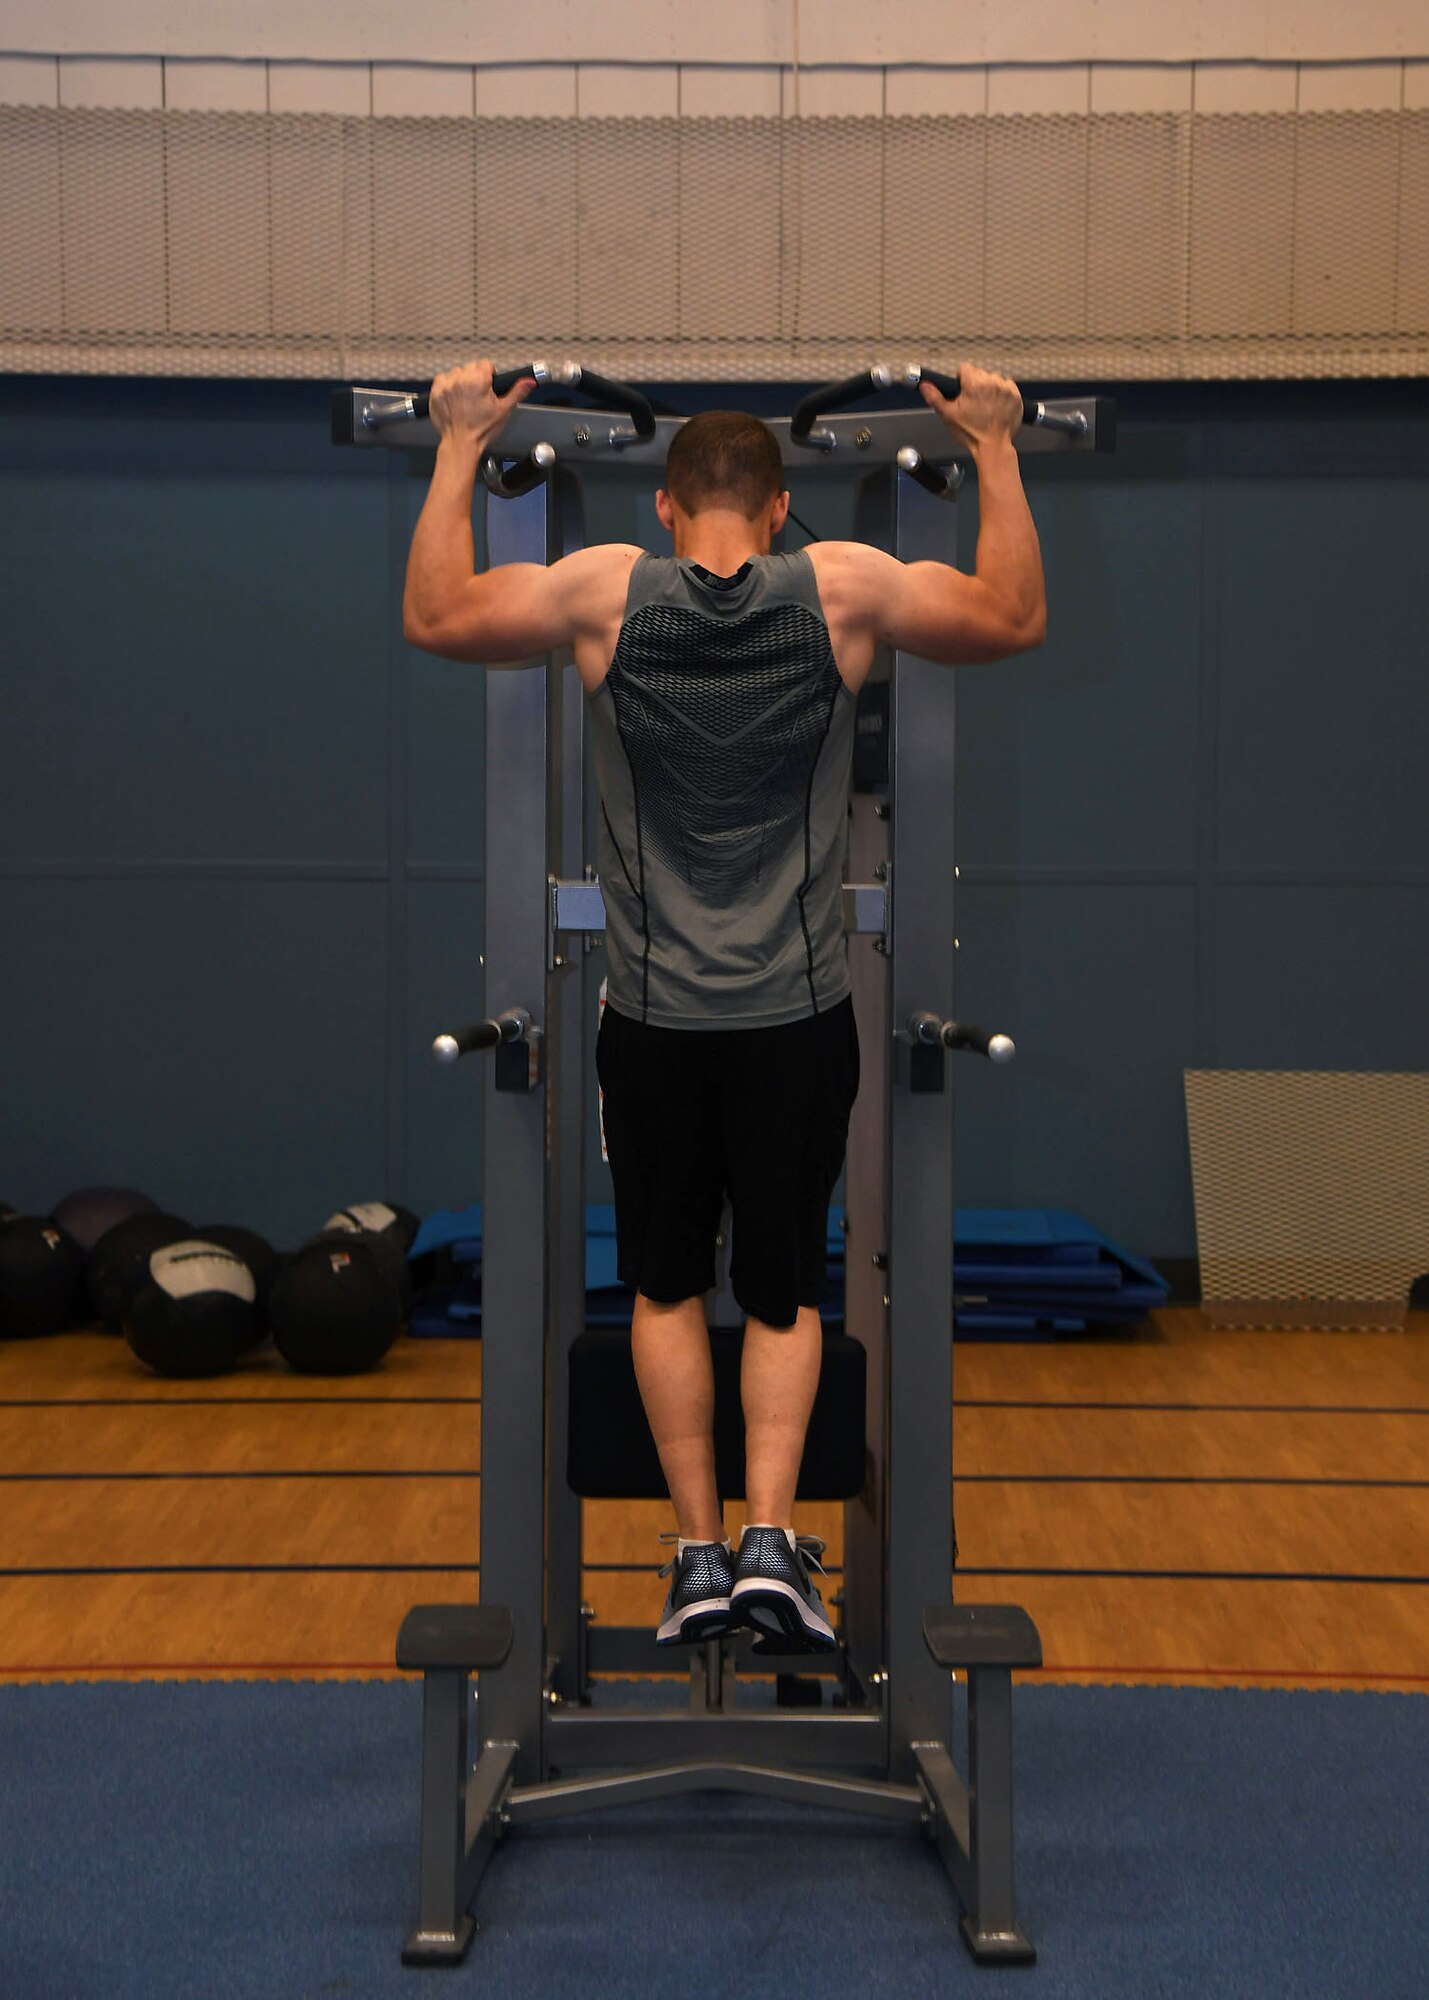 Airman 1st Class Austin Bristow, a heating, ventilation and air conditioning apprentice with the 319th Civil Engineer Squadron, performs a pull-up Nov. 2, 2017, in the fitness center on Grand Forks Air Force Base, N.D. Bristow started his fitness journey two years ago after he realized he was too heavy to enlist. (U.S. Air Force photo by Airman 1st Class Elora J. Martinez)